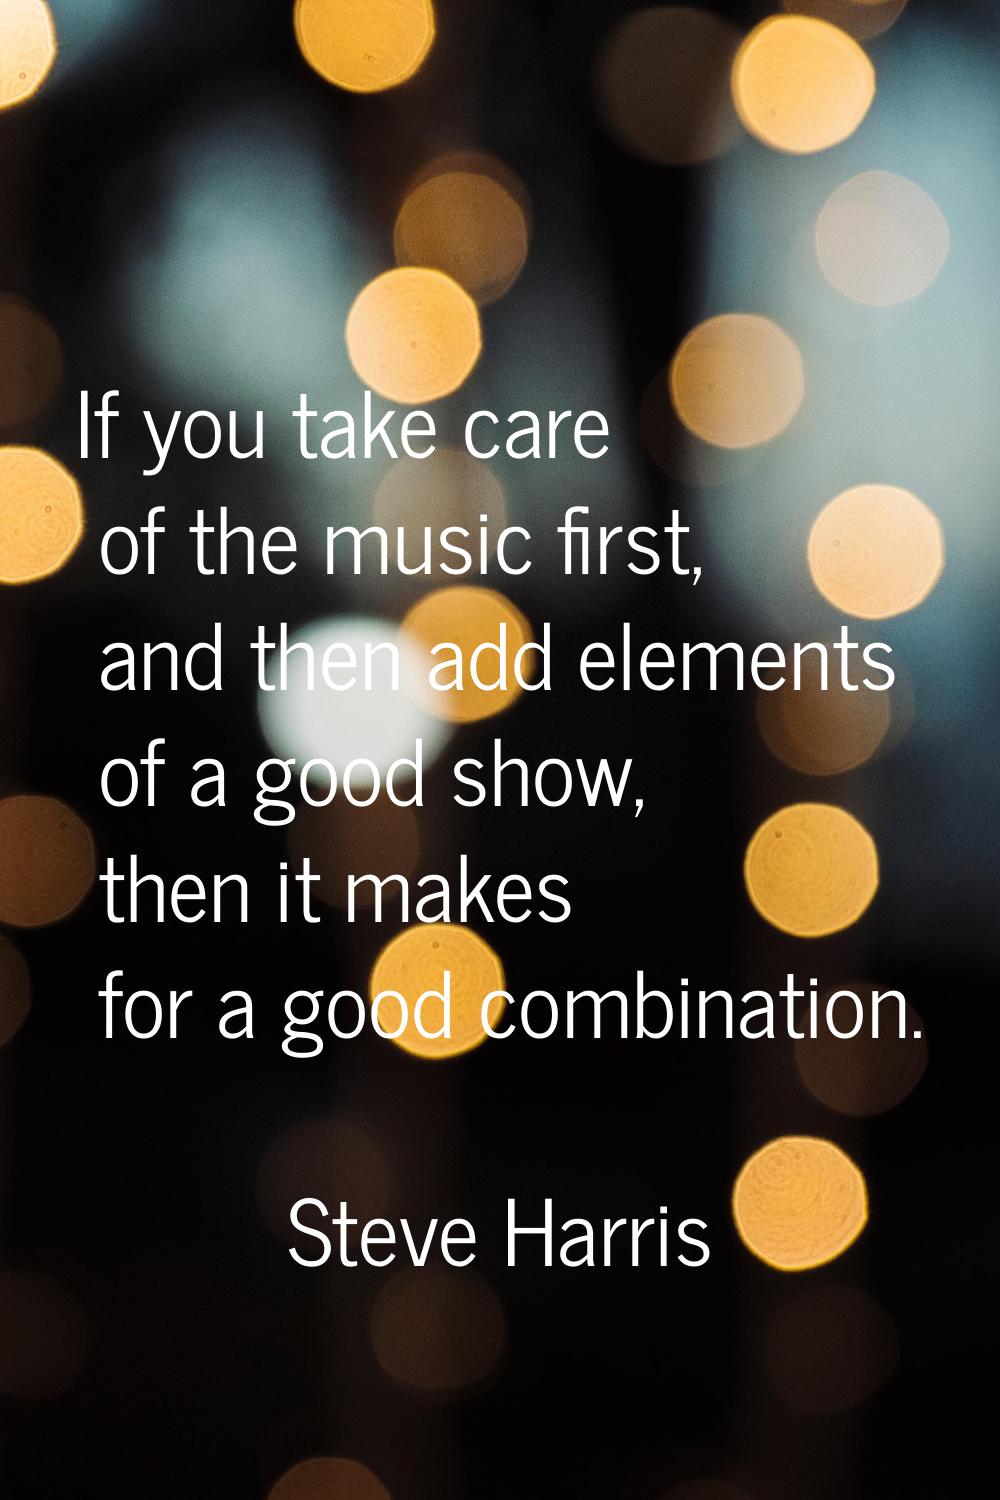 If you take care of the music first, and then add elements of a good show, then it makes for a good